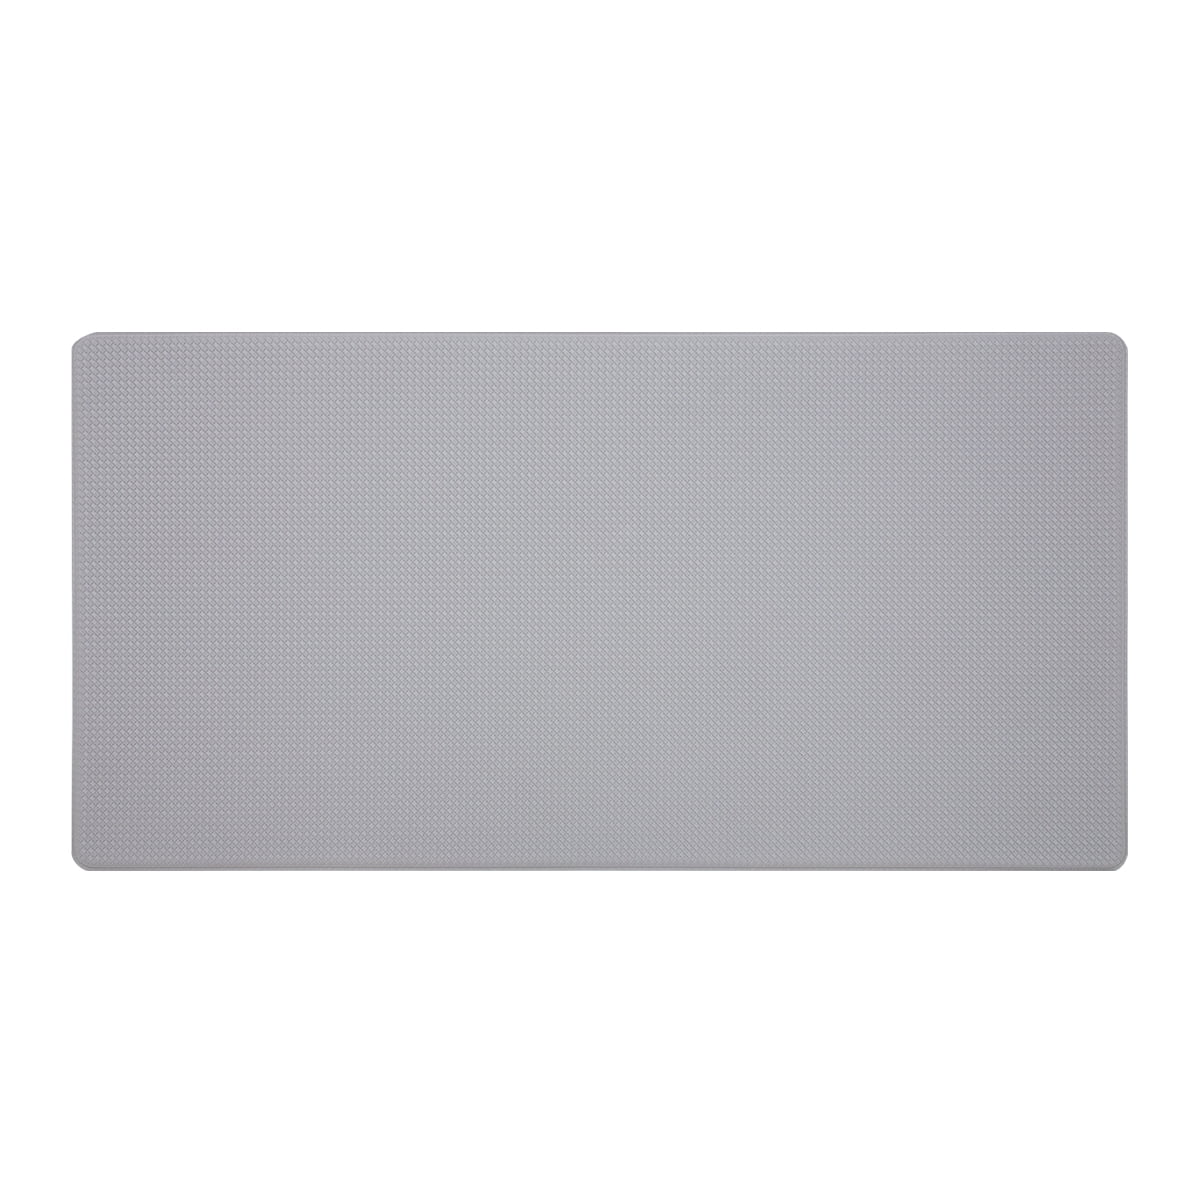 Buy RAY STAR 3/4 Inches 20x39 Inches Extra Thick Non-slip Kitchen